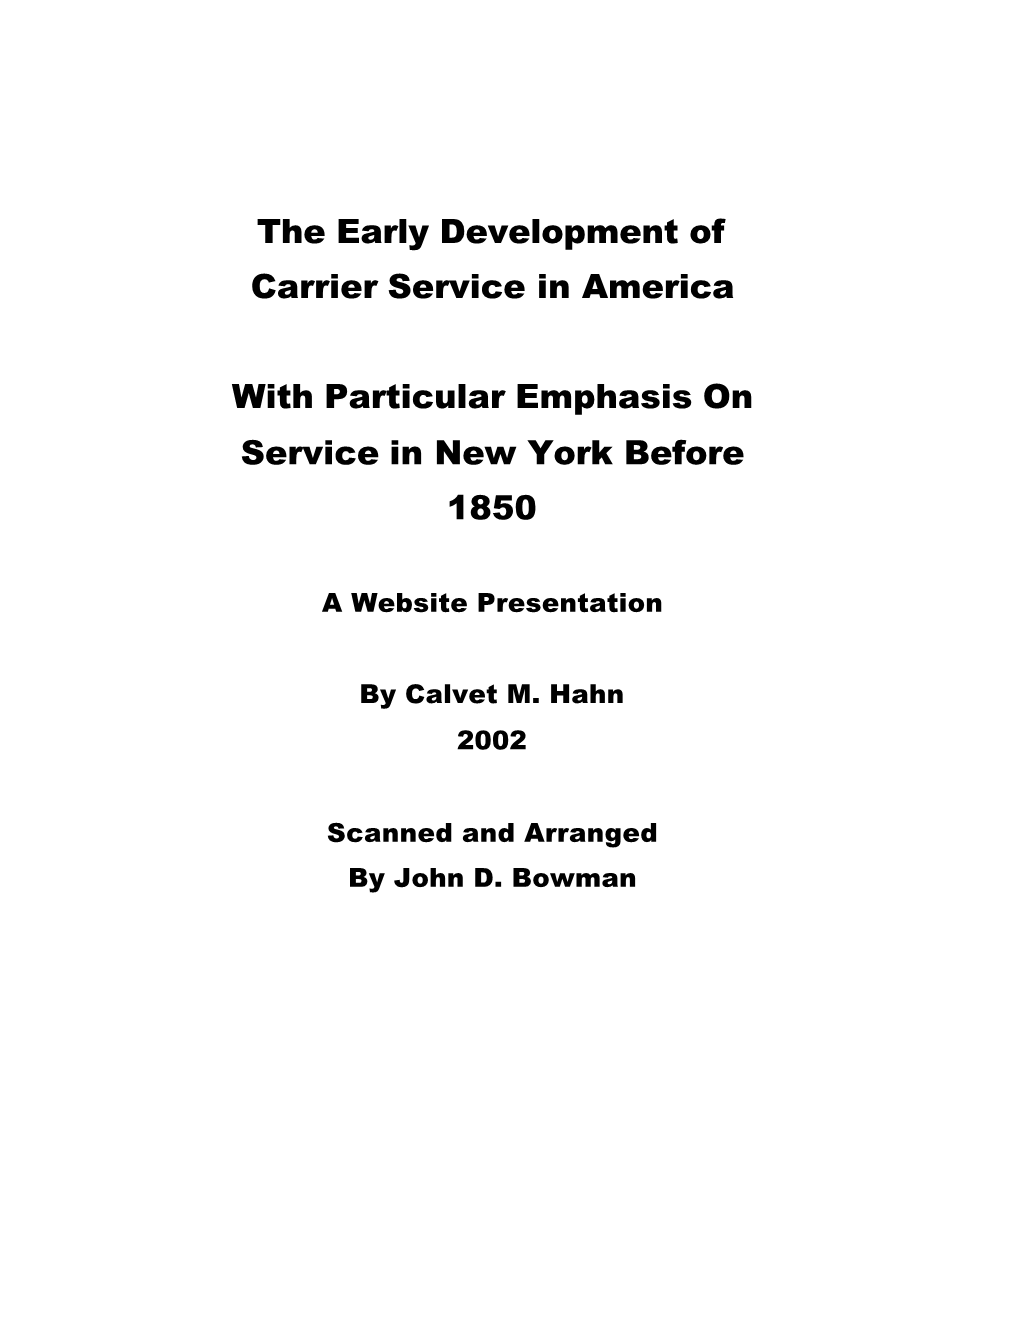 The Early Development of Carrier Service in America with Particular Emphasis on Service in New York Before 1850